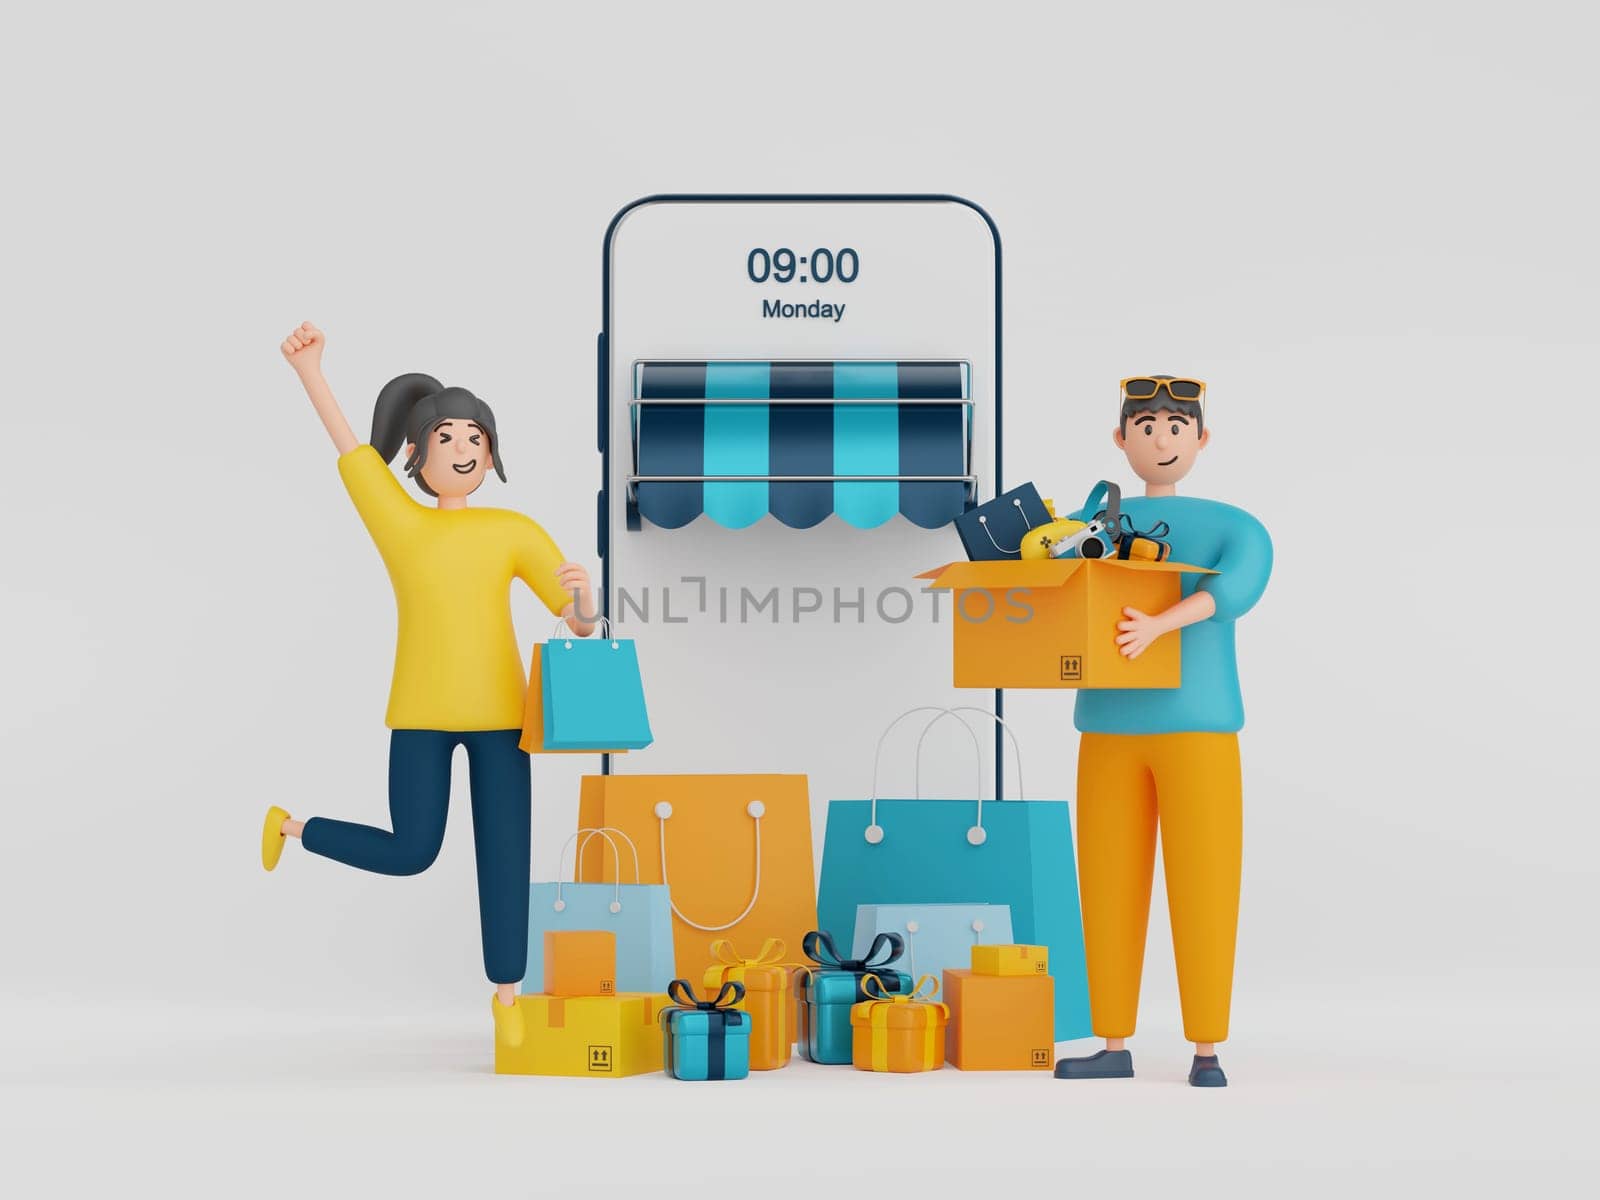 3d illustration of a businessman character shopping online via application on smartphone with shopping item. by nutzchotwarut